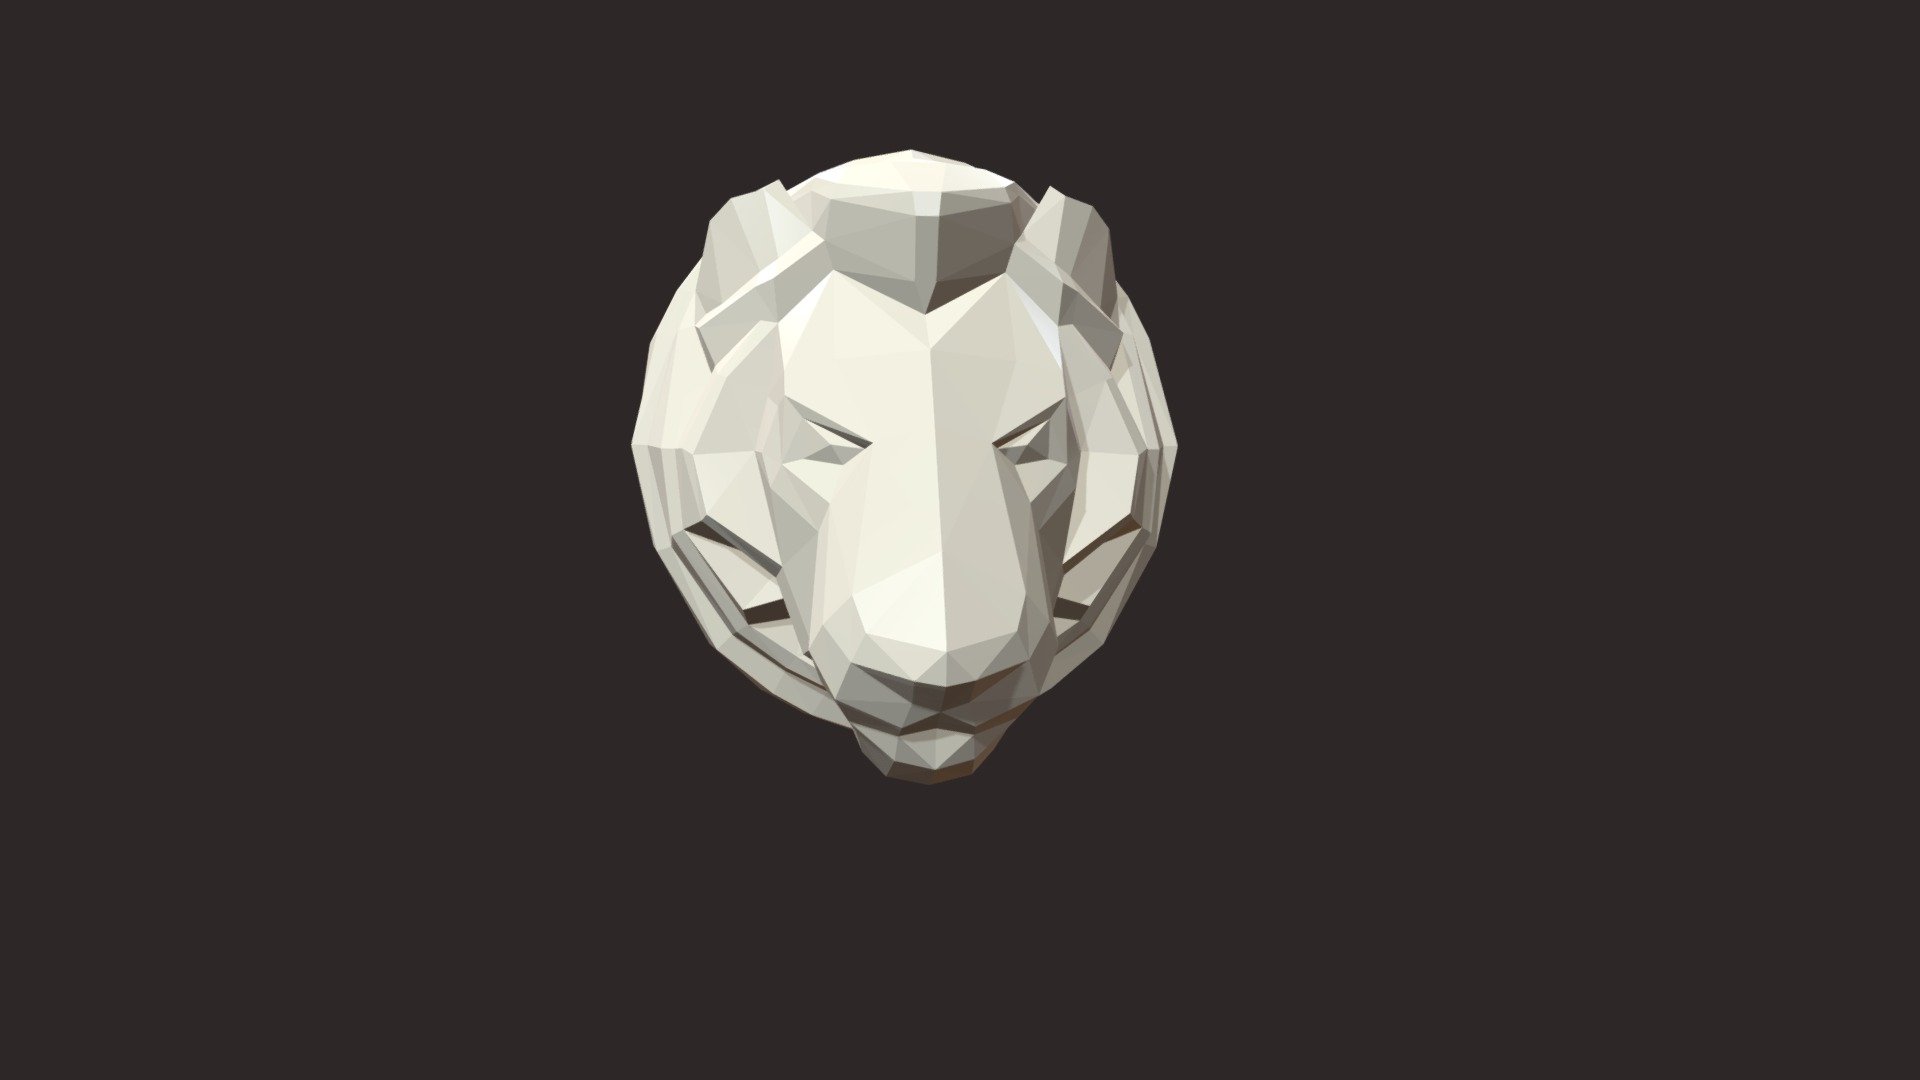 Print ready lion head.

Measure units are millimeters, it is about 3 cm in diameter.
Wall thickness for hollow version is about 0.7 mm.

Mesh is manifold, no holes, no inverted faces.

Available formats: .blend, .stl, .obj, .fbx

Two versions of the had are available:

1) Lion_Head_LP. (.blend, .stl, .obj, .fbx, dae, .stp) 1252 triangular faces.

2) Lion_Head_LP_solid. (.blend, .stl, .obj, .fbx, dae, .stp) 724 triangular faces 3d model